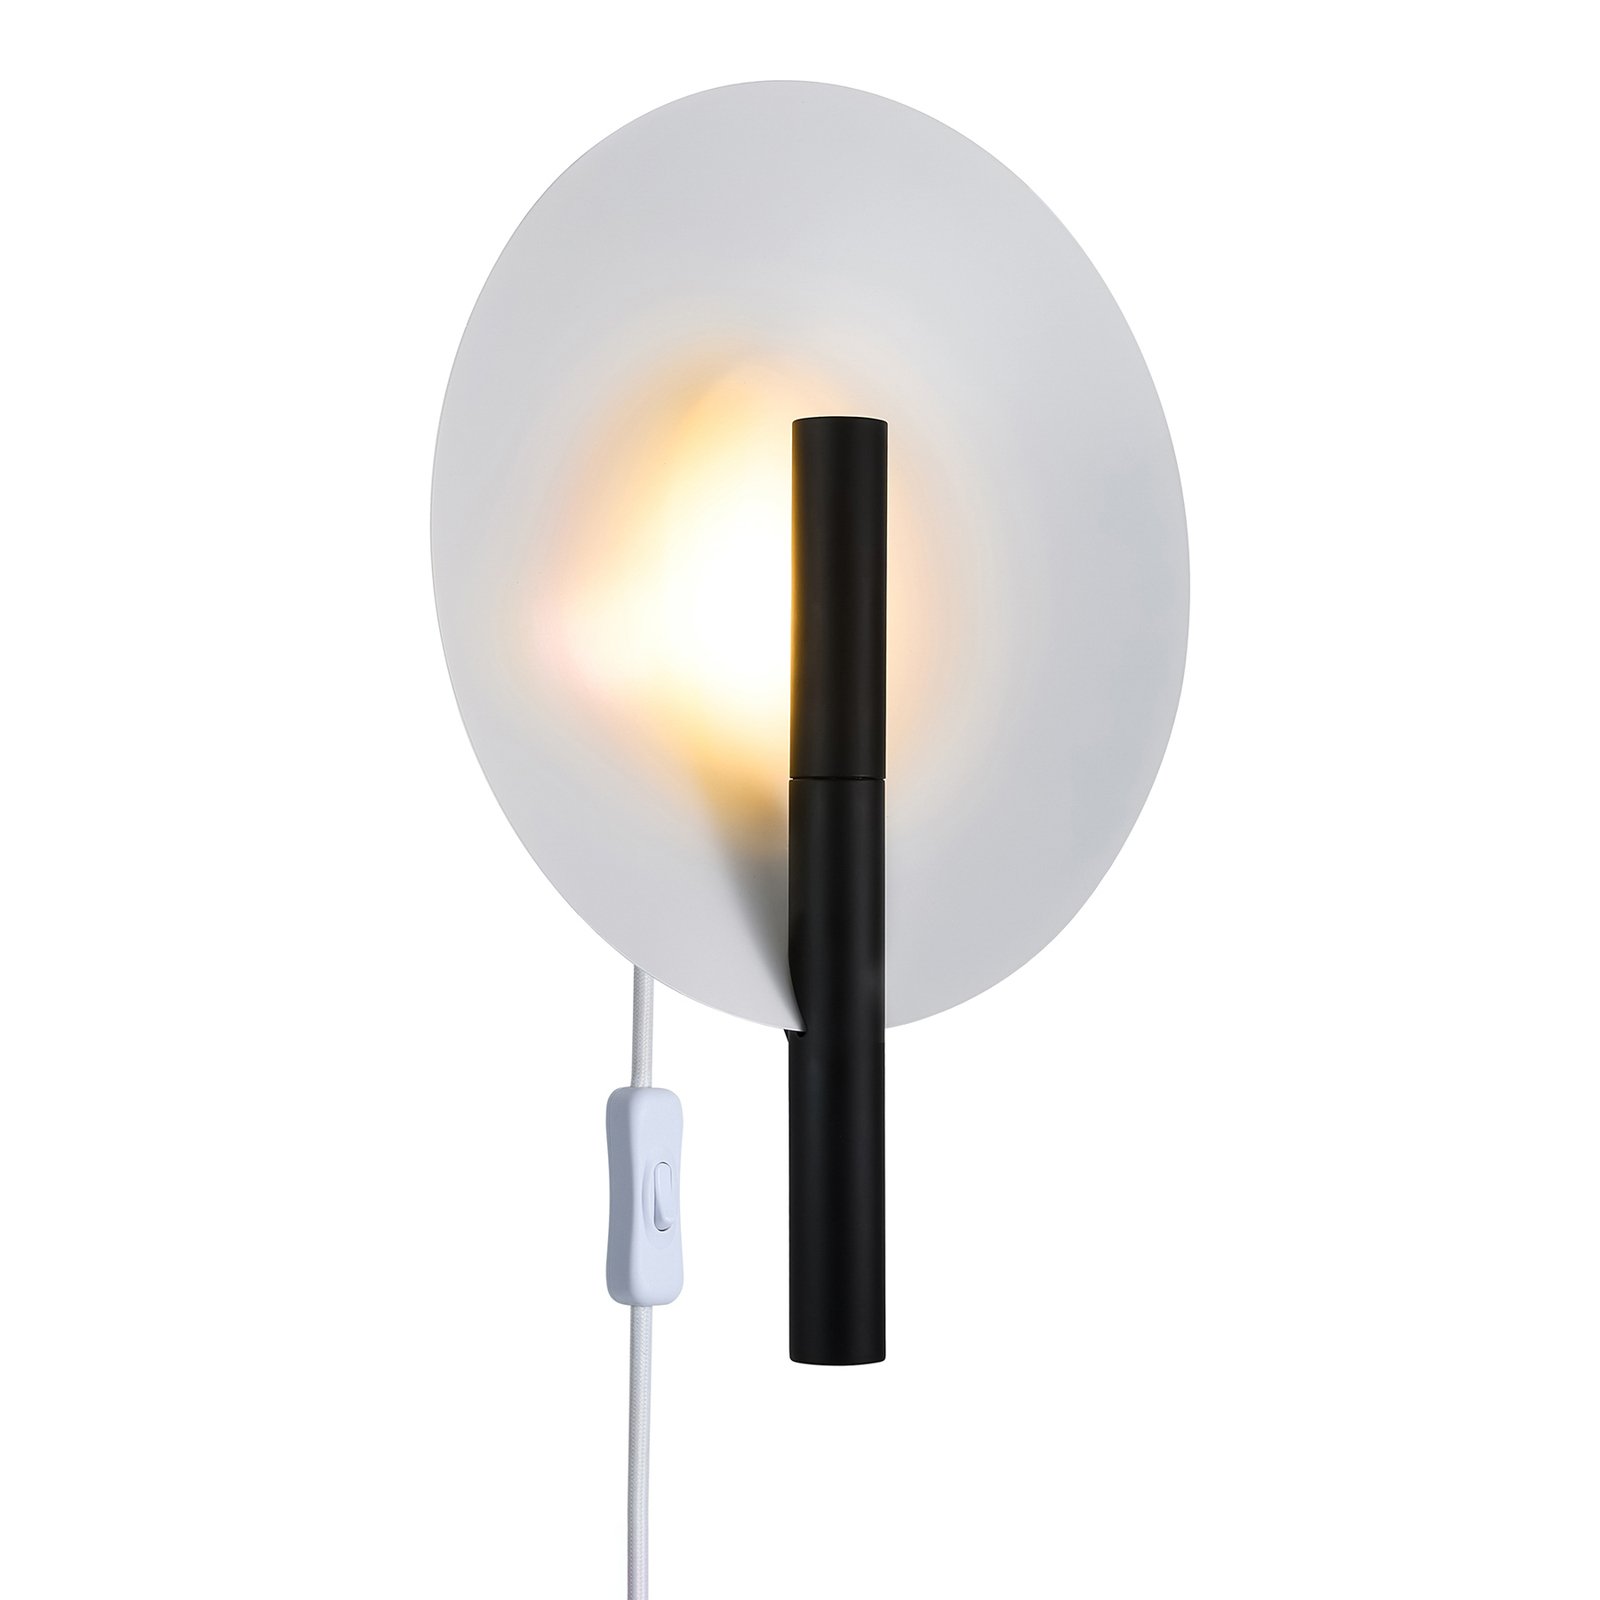 Furiko wall light with a switch, black/white